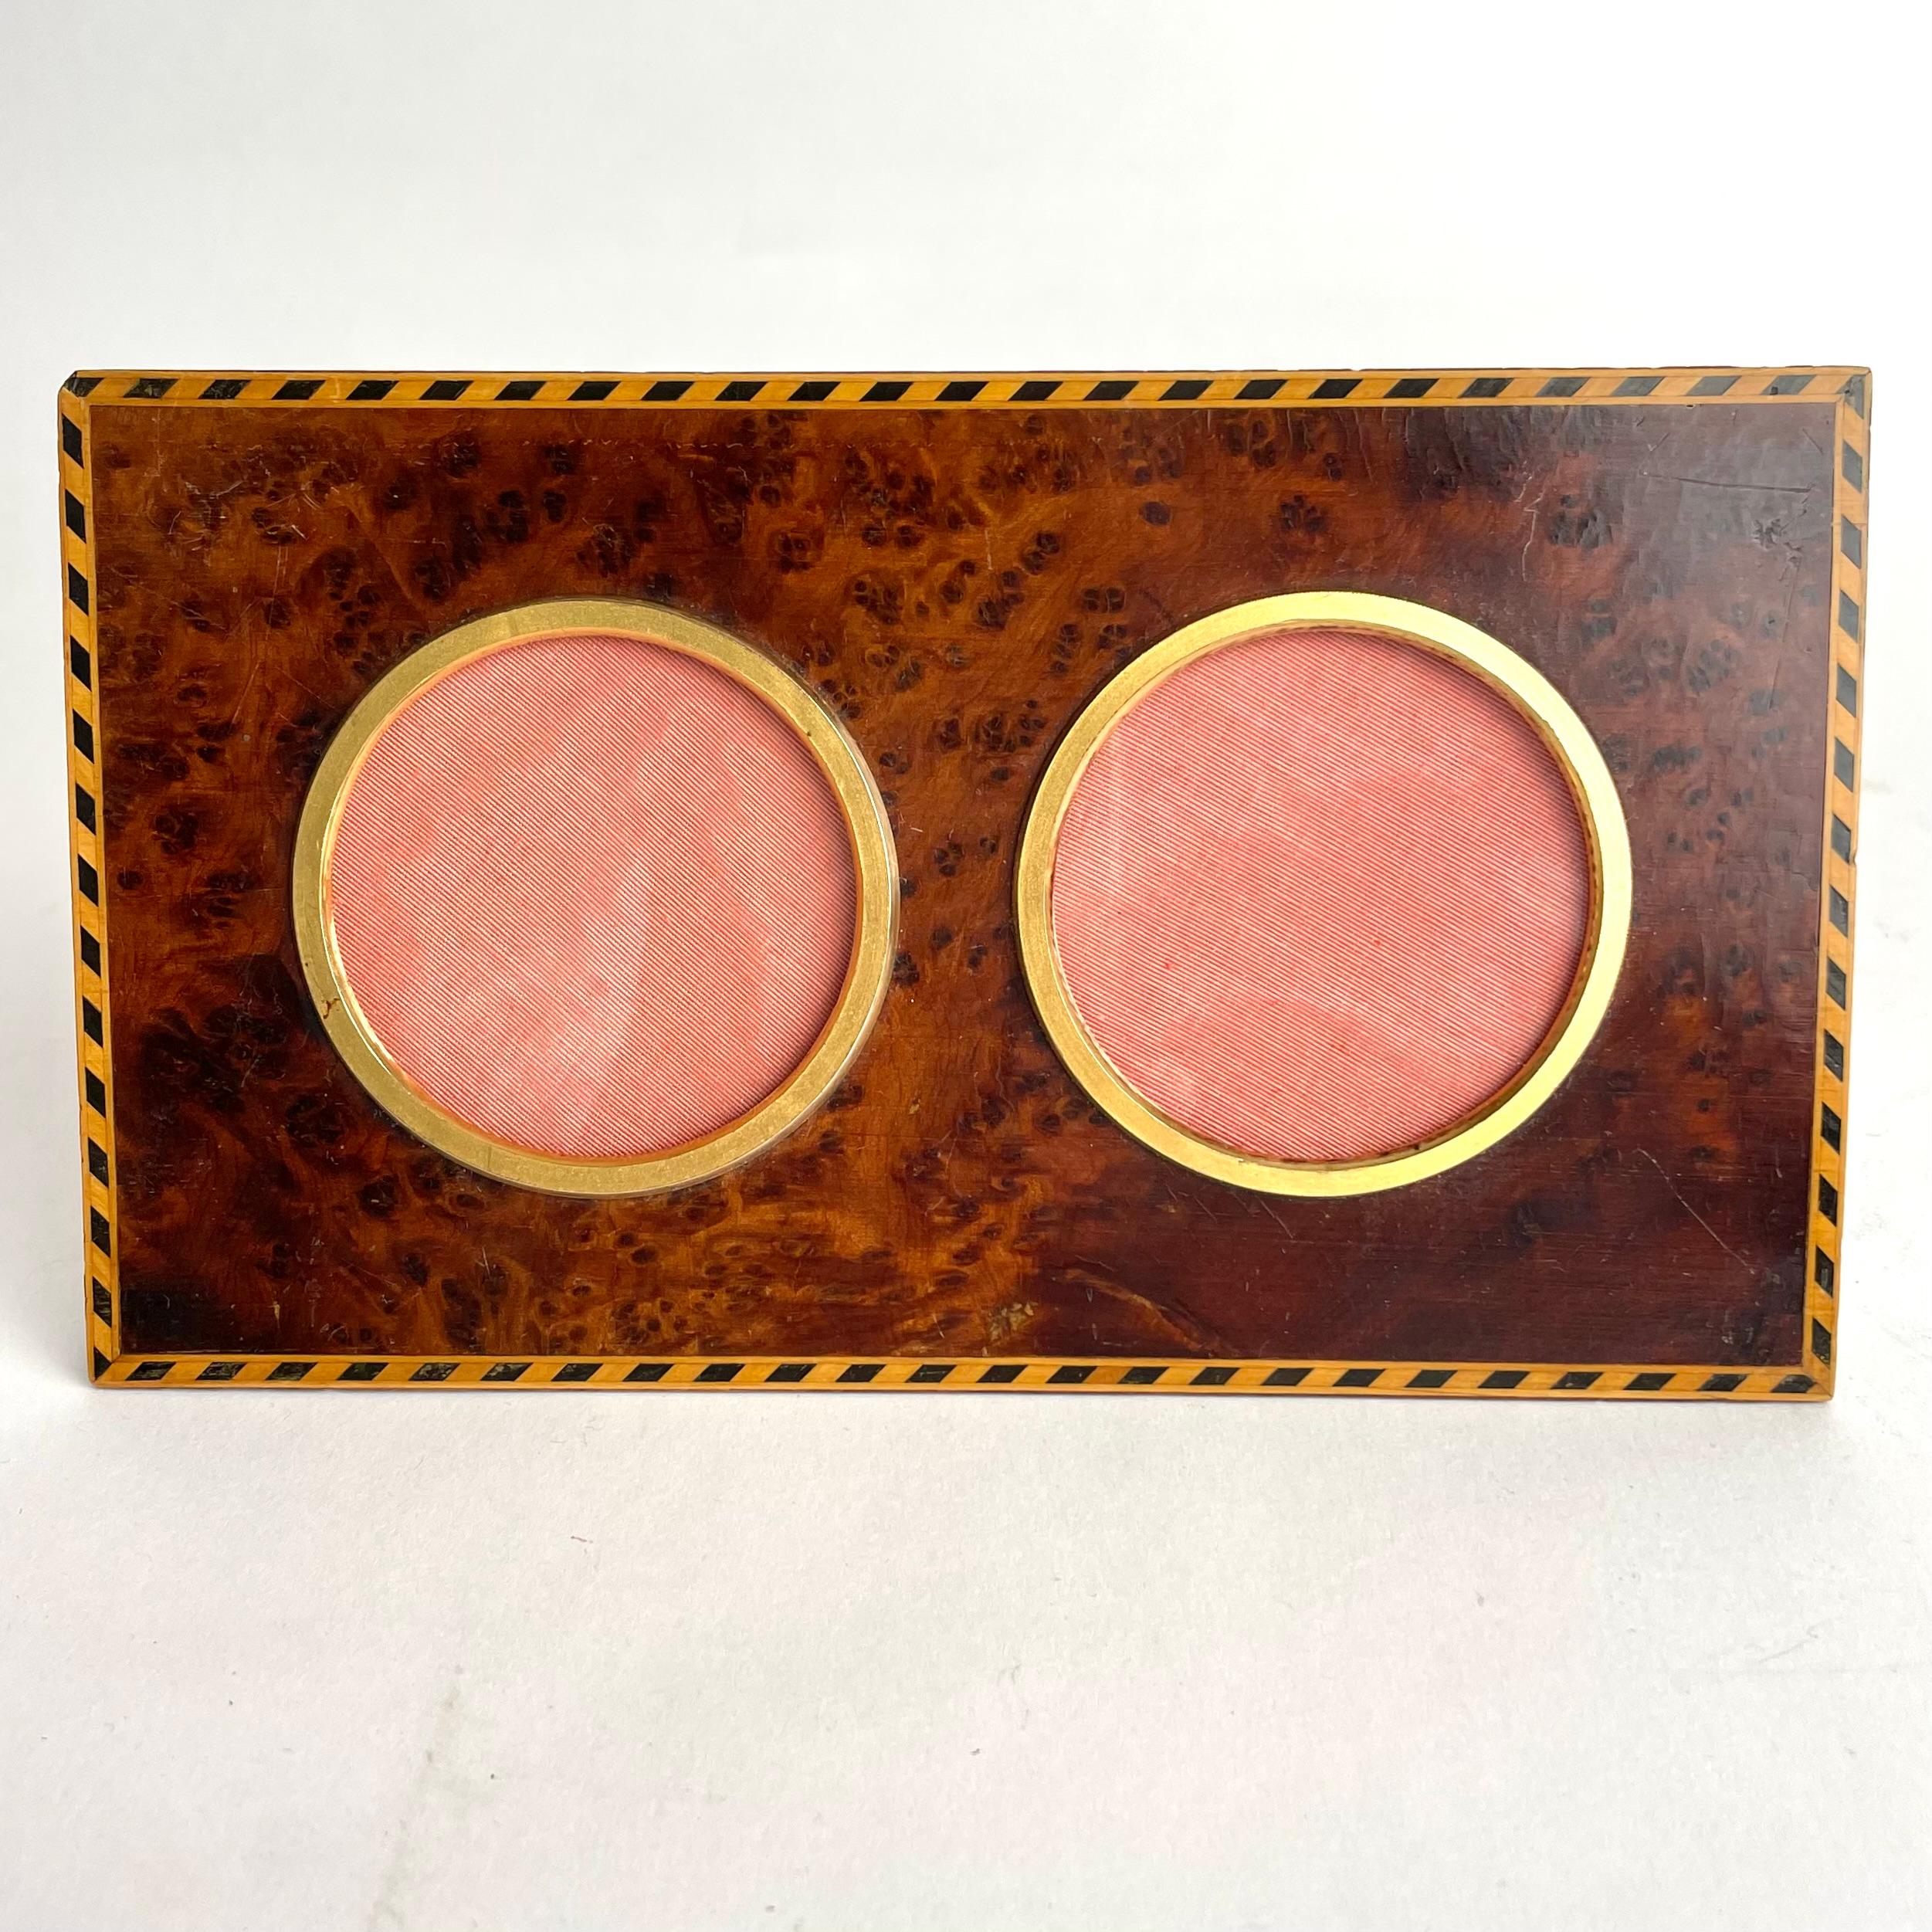 Elegant photo frame in thuja burl and intarsia decor with gilded details from the 1930s. 


Wear consistent with age and use 